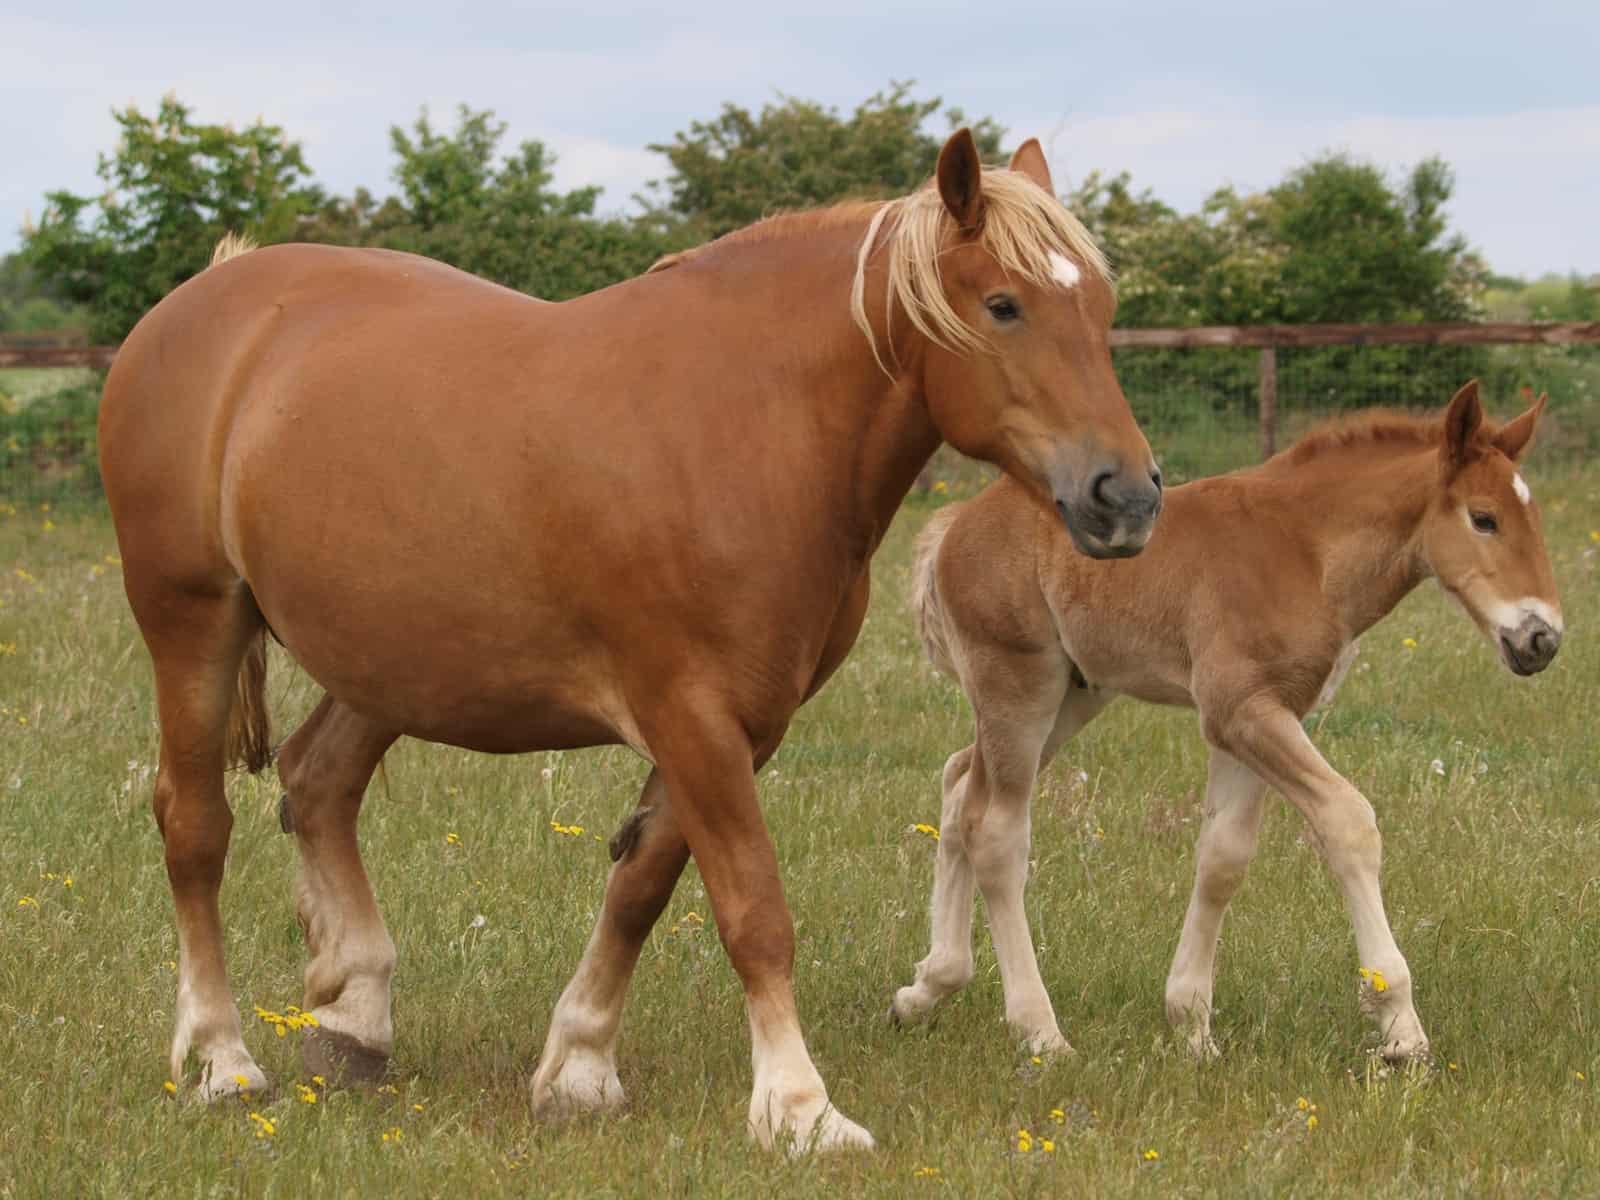 Mare Thyroid Condition Might be Linked to Foal Deaths